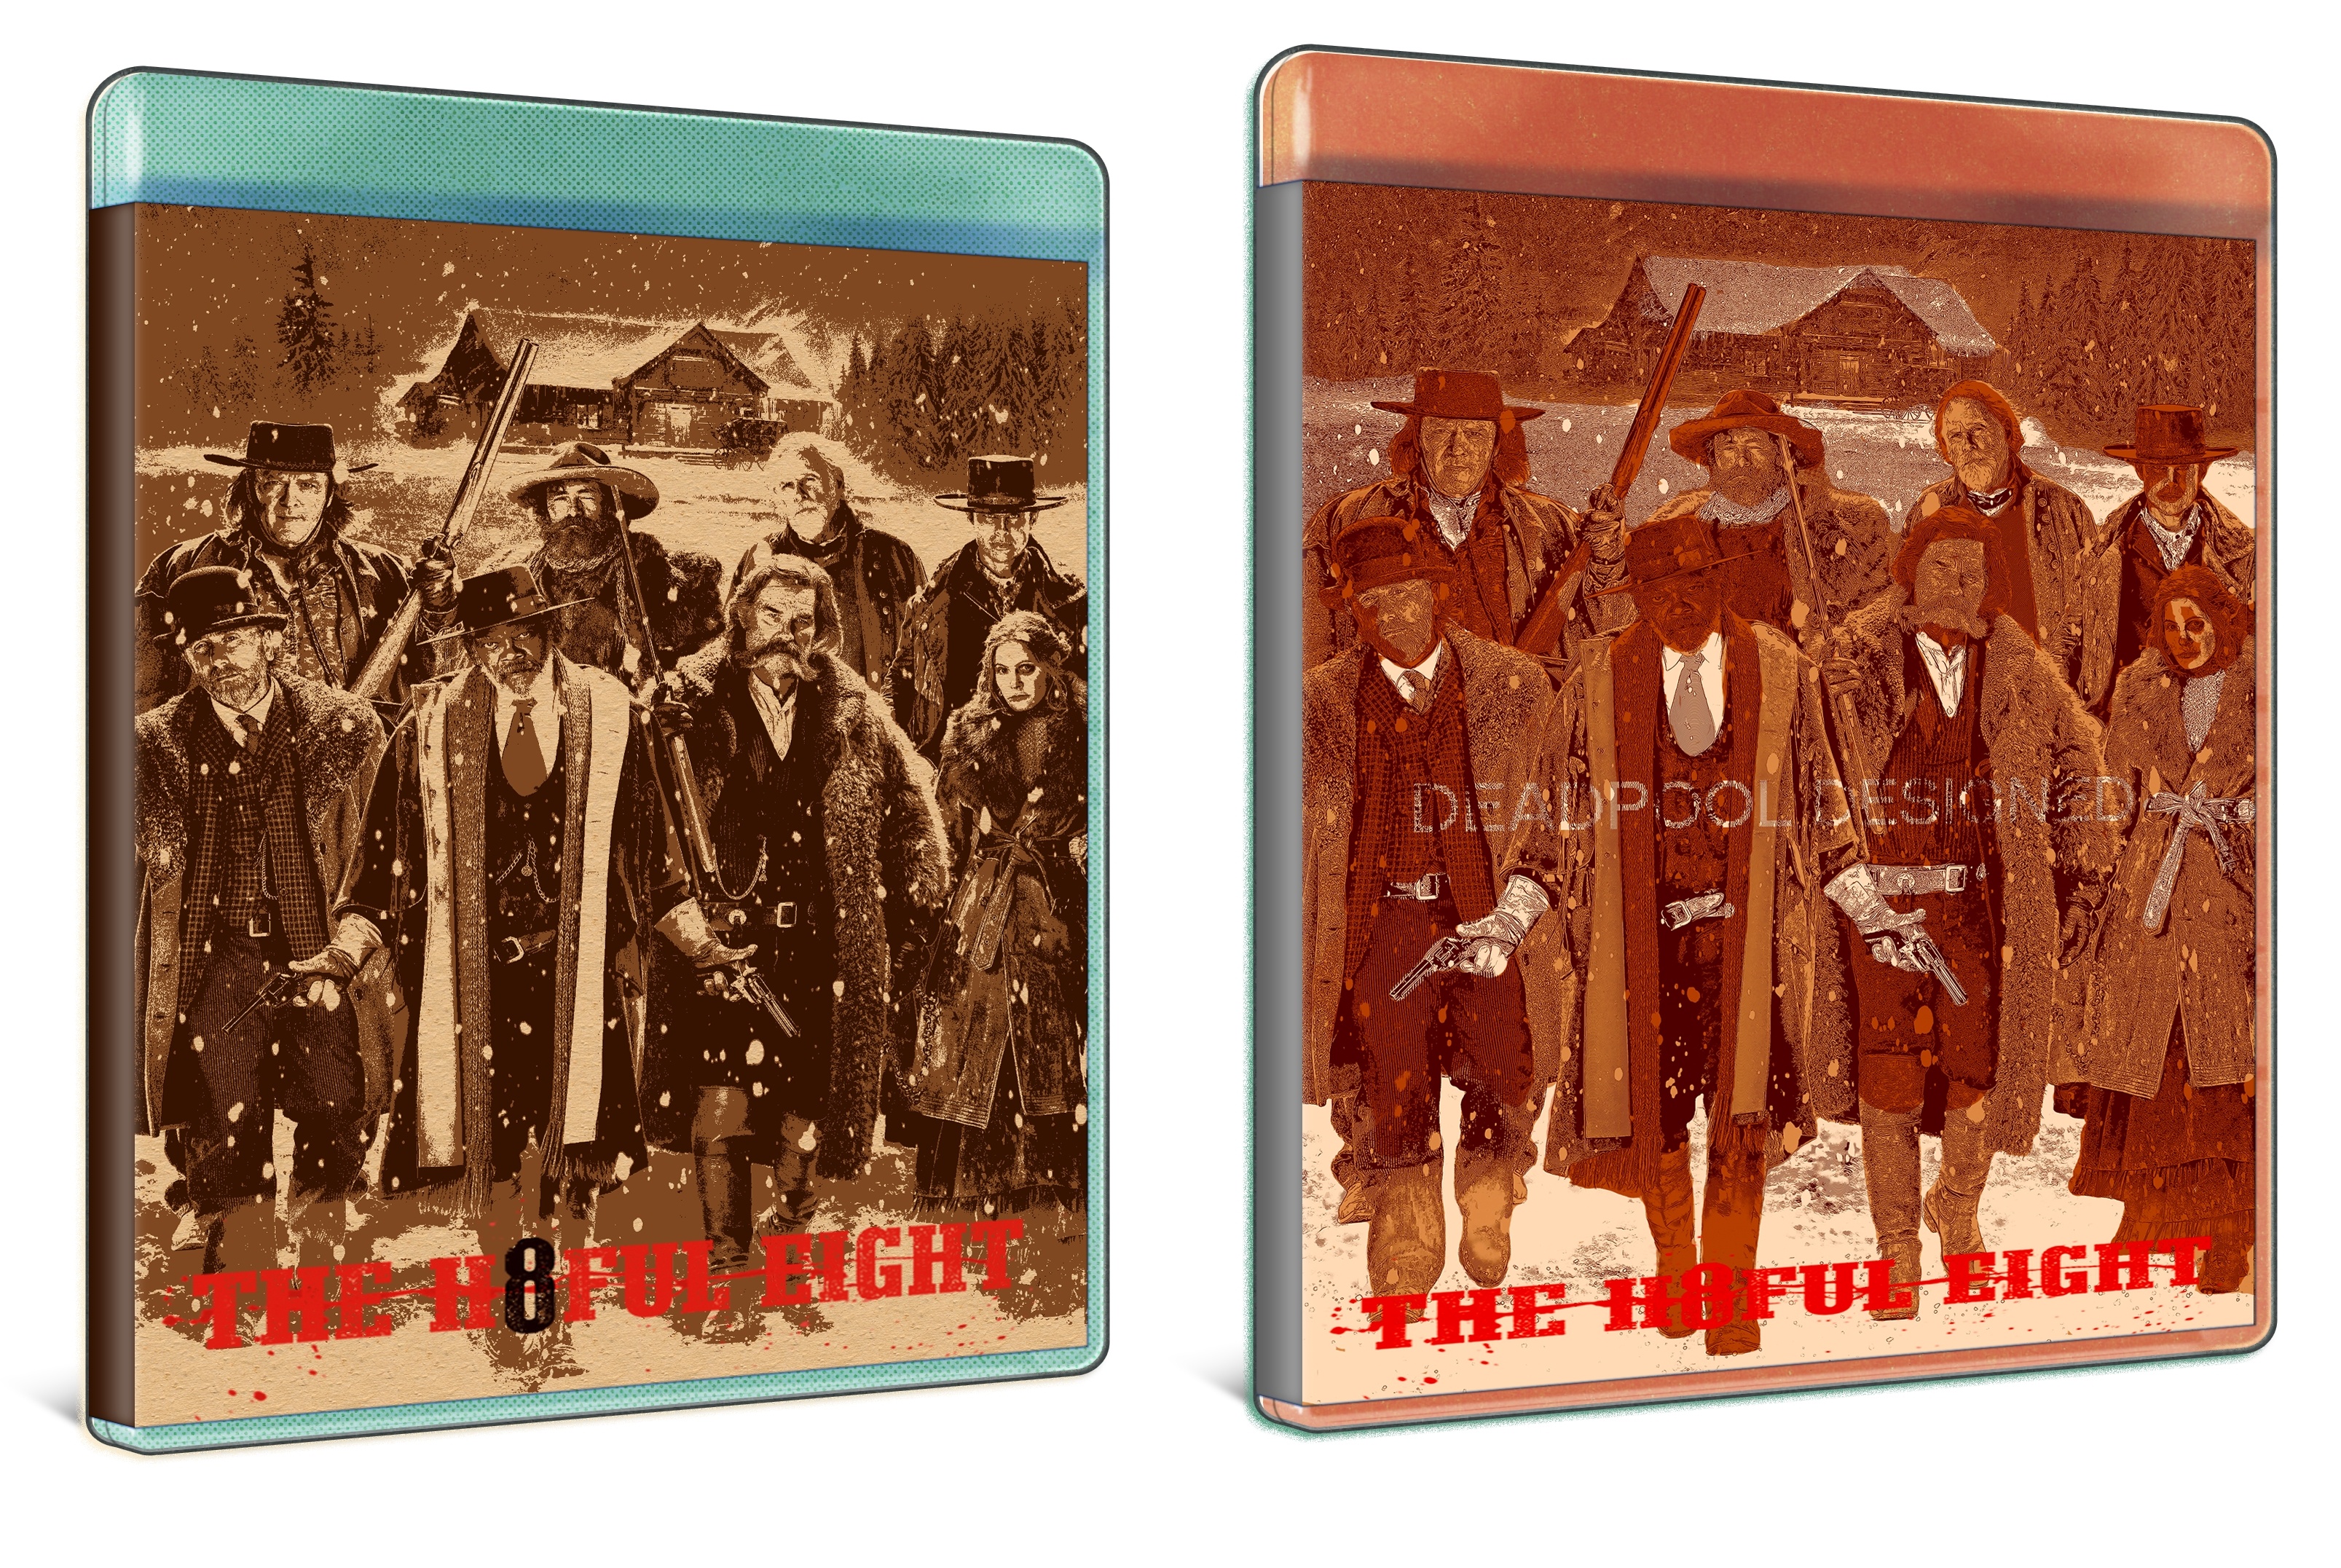 The Hateful Eight box cover